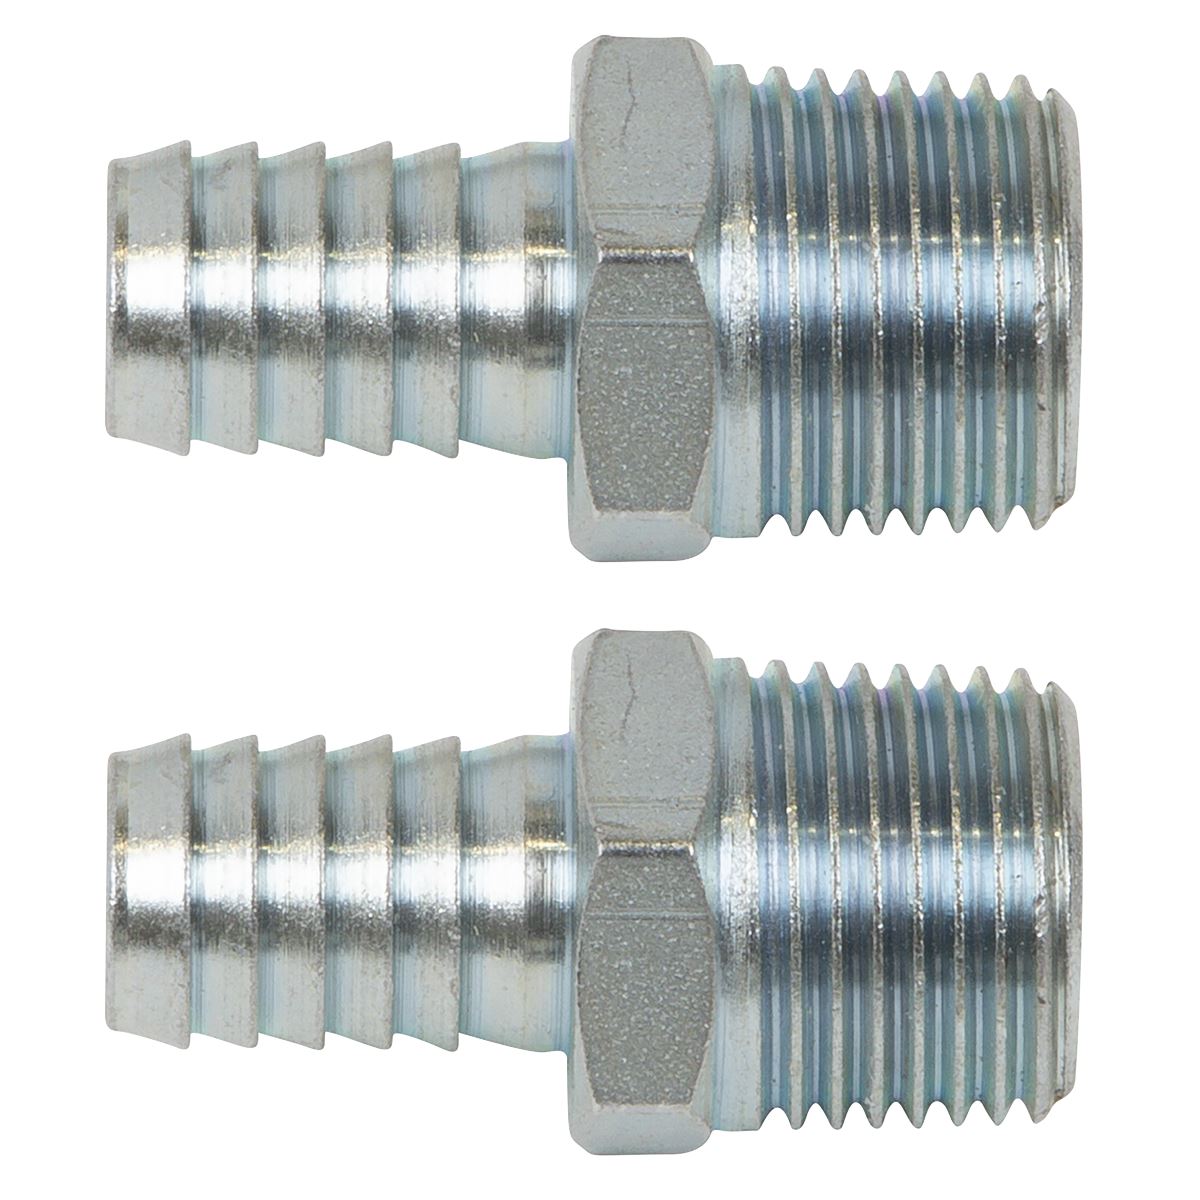 PCL Screwed Tailpiece Male 1/2"BSPT - Ø1/2" Hose - Pack of 2